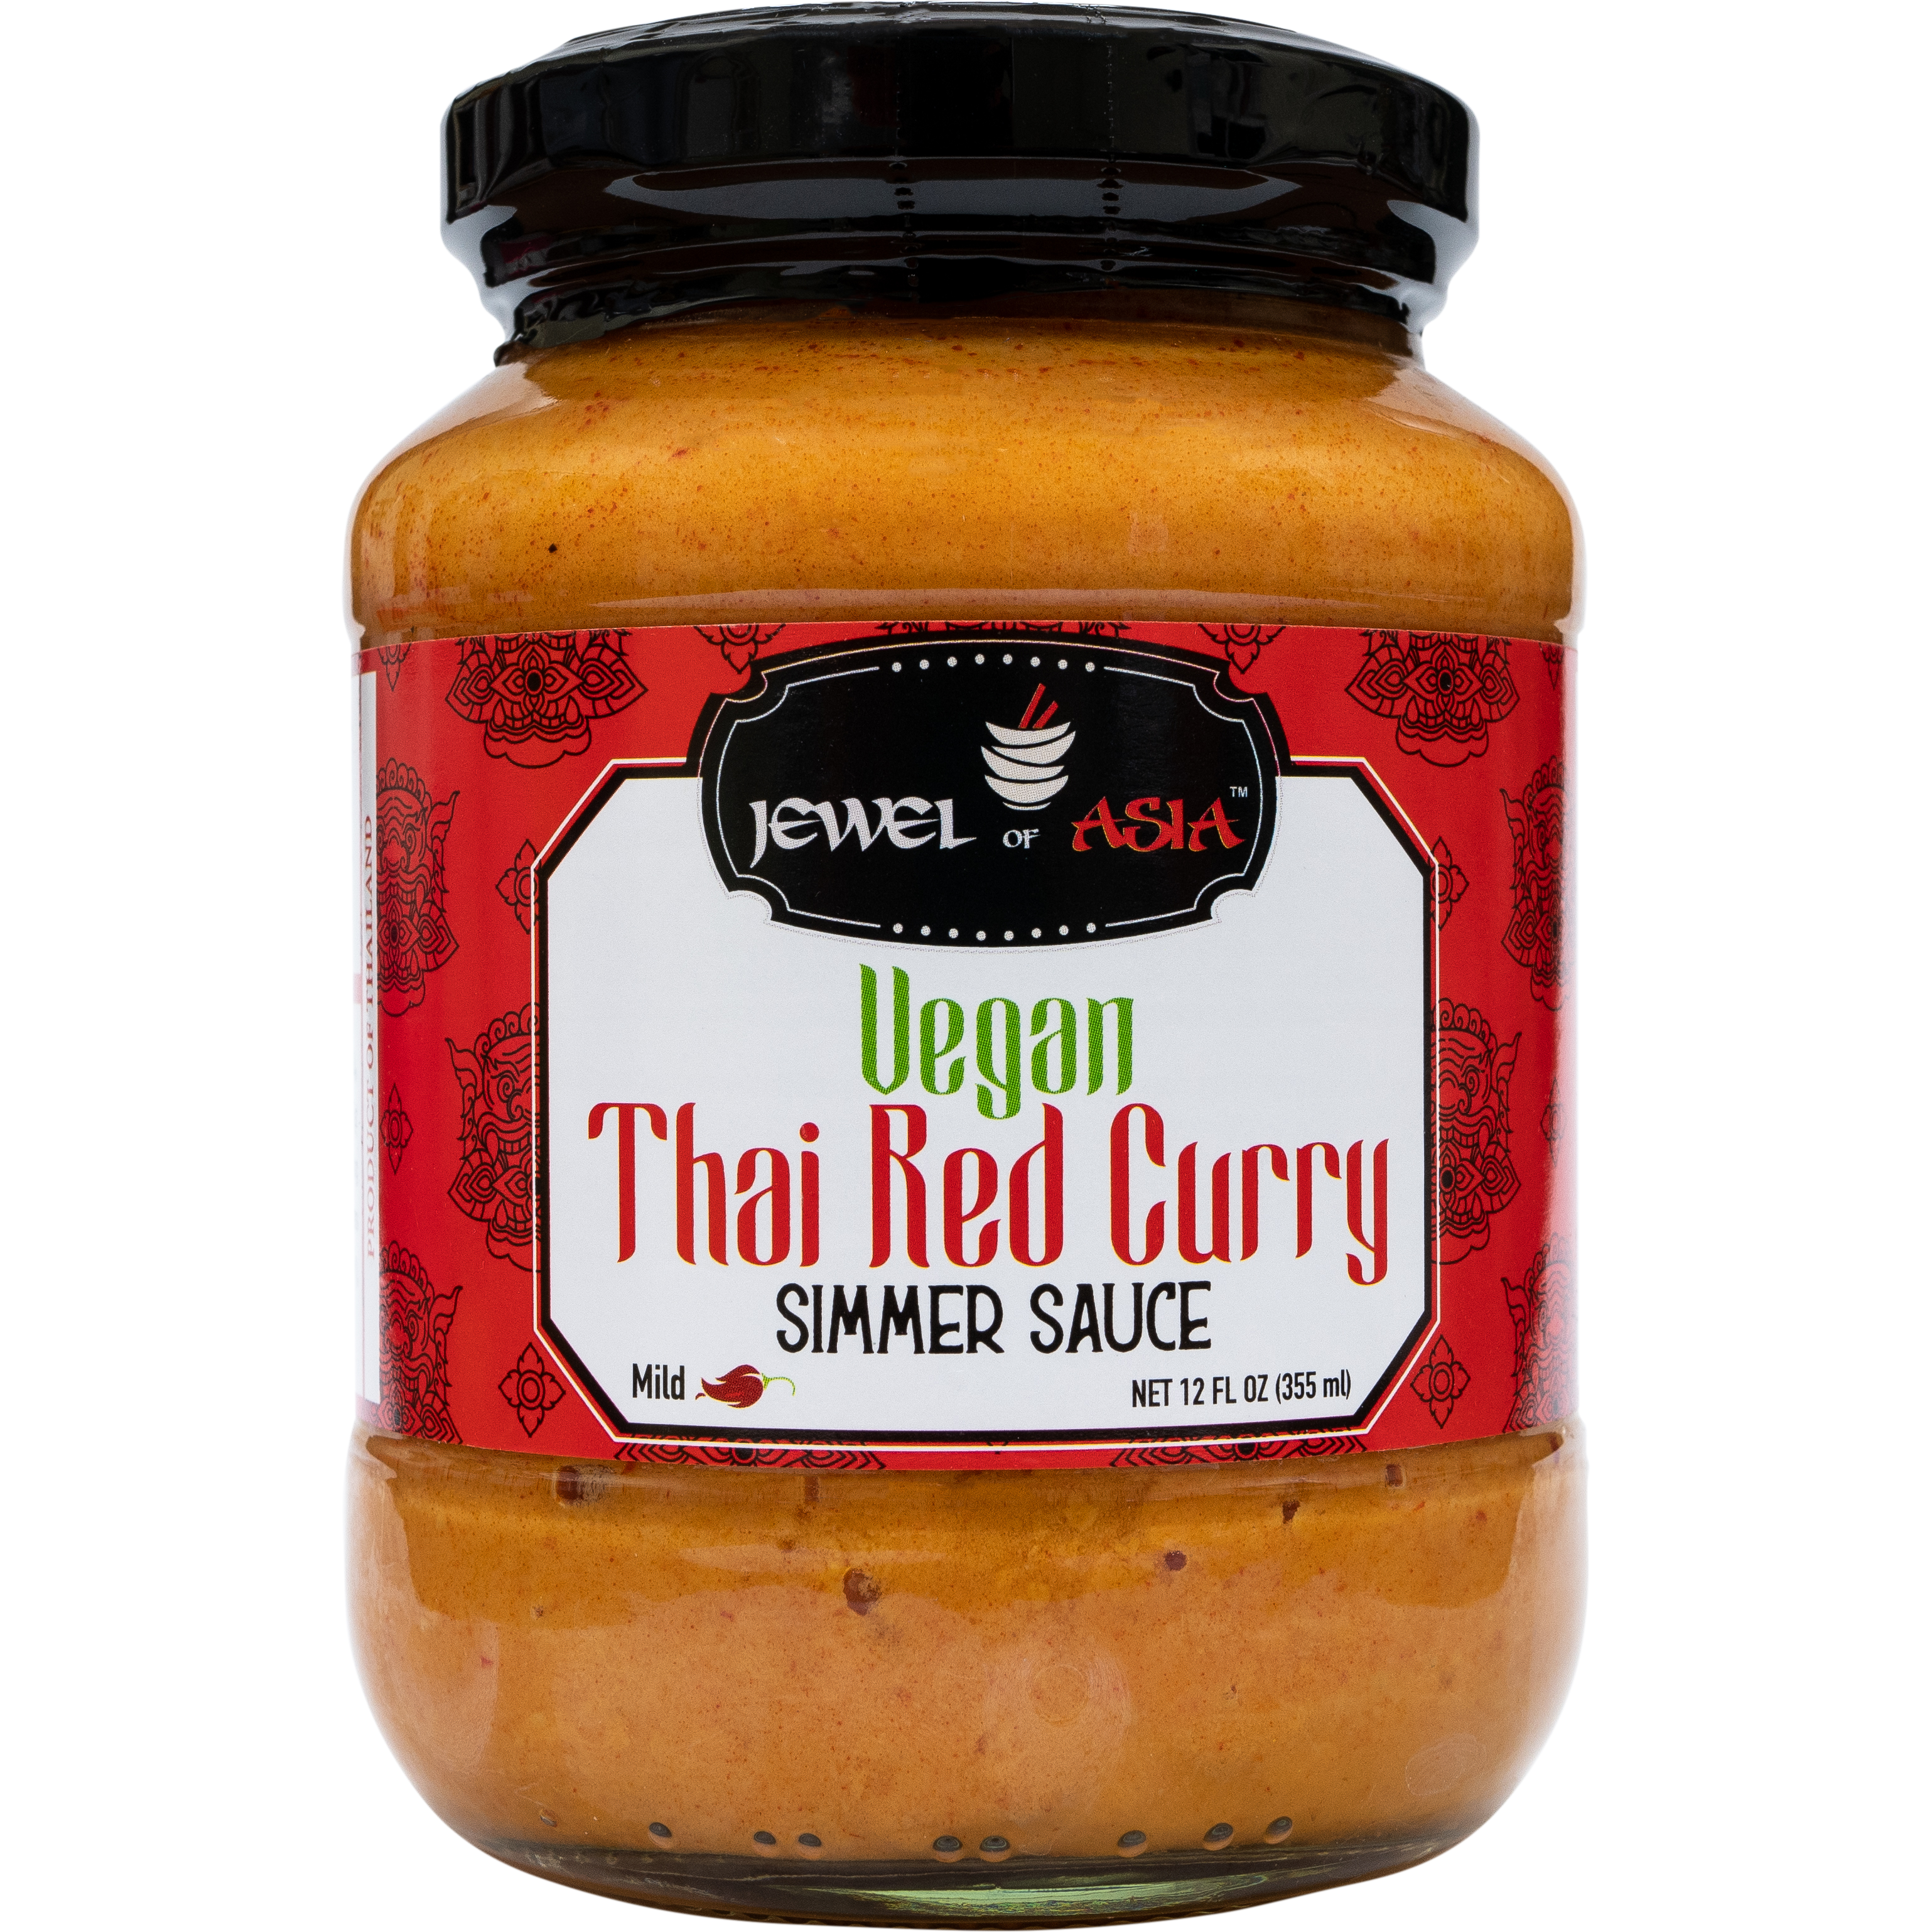 Case of 12 - Jewel Of Asia Vegan Thai Red Curry Simmer Sauce - 350 Gm (12 Oz)